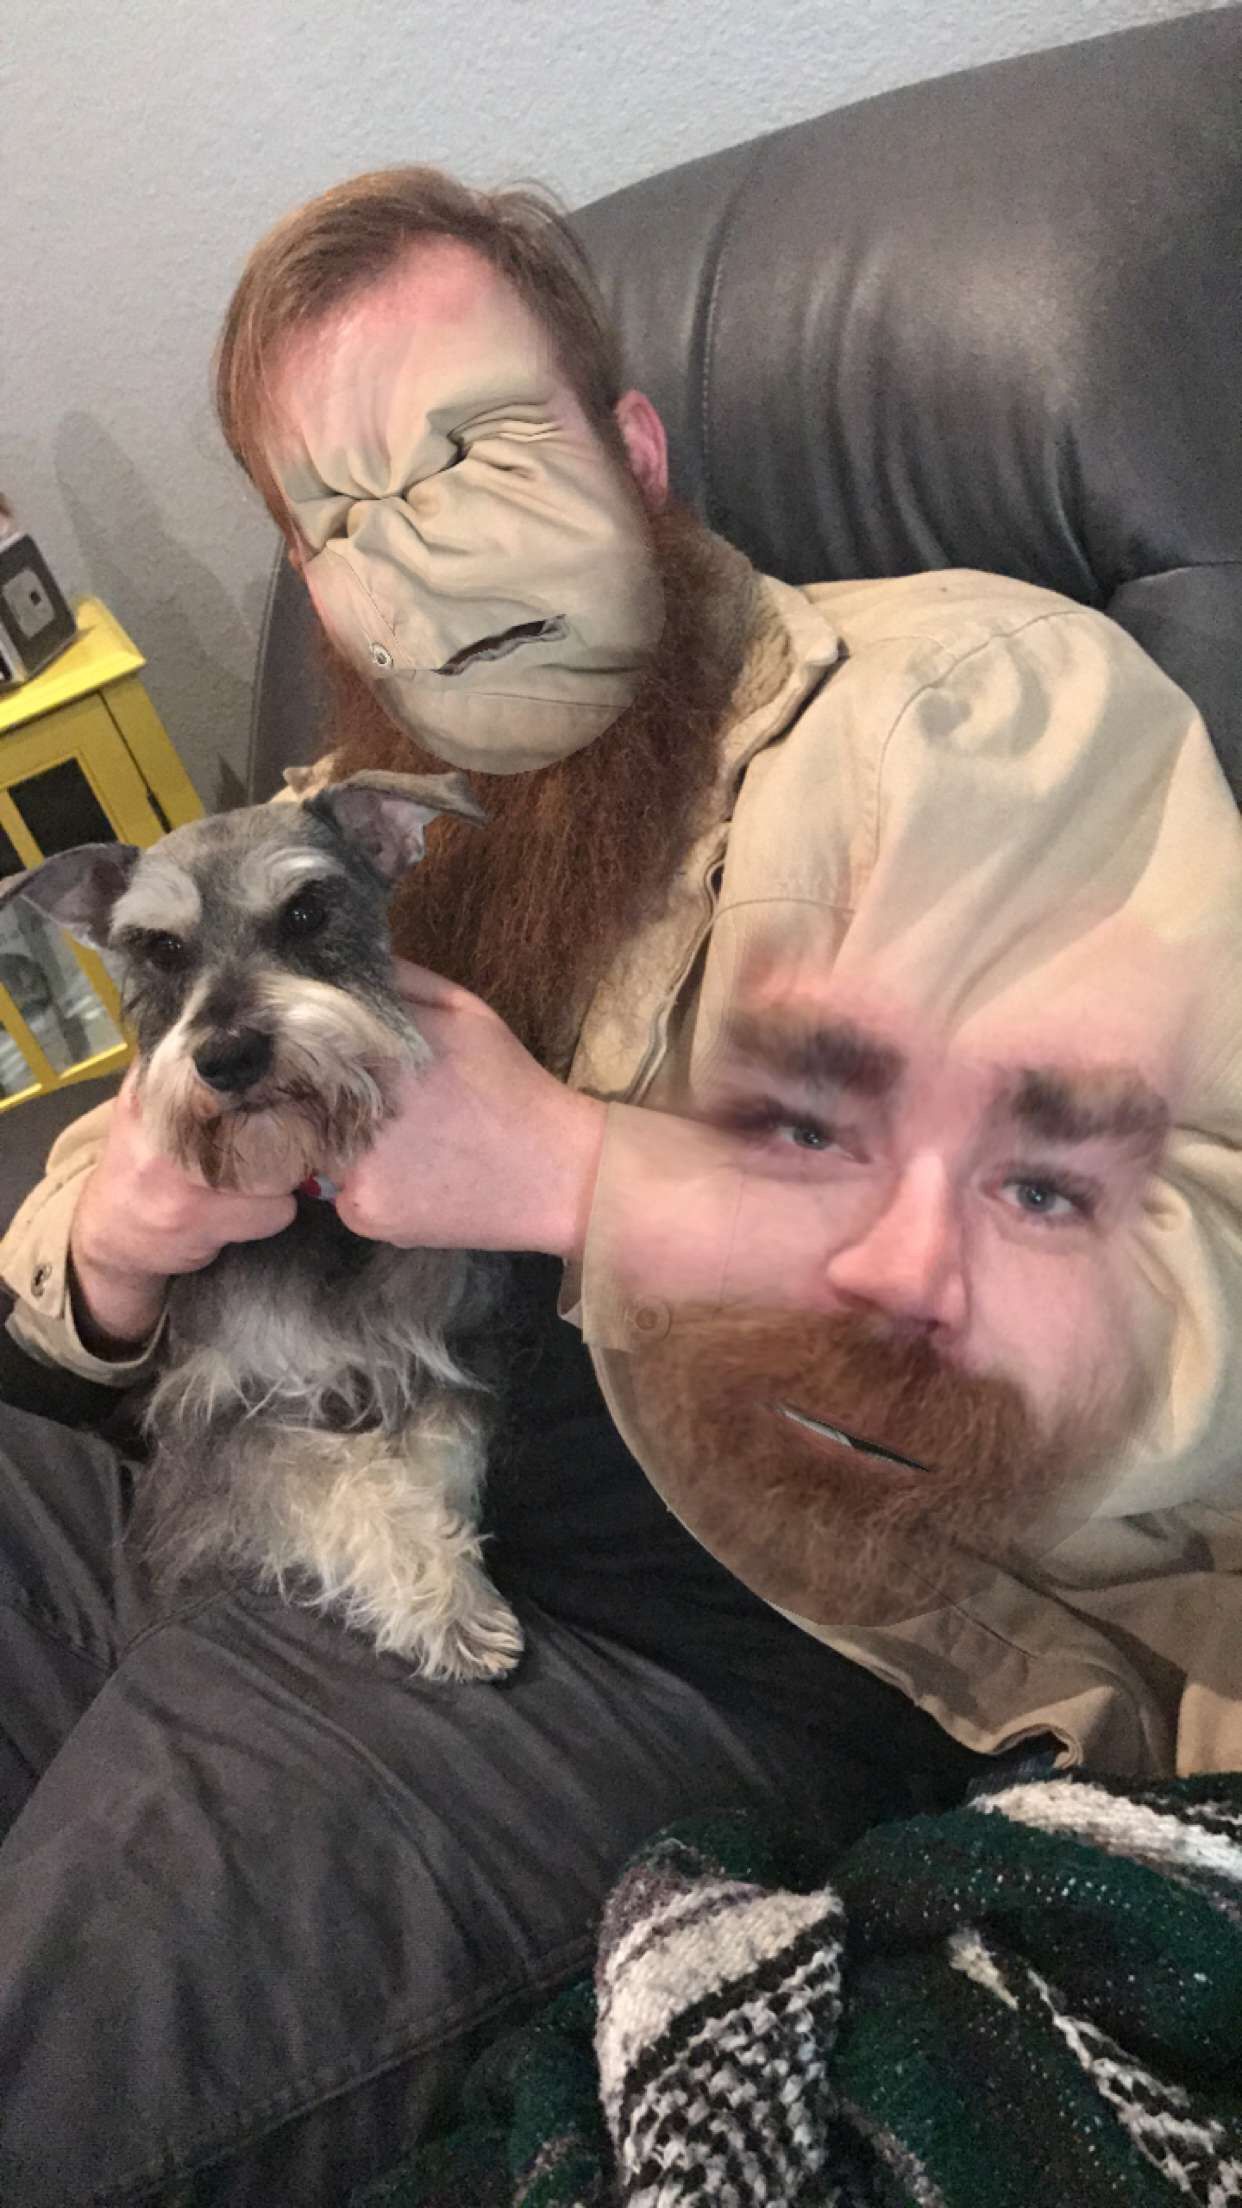 So, I attempted to face swap with my pooch...